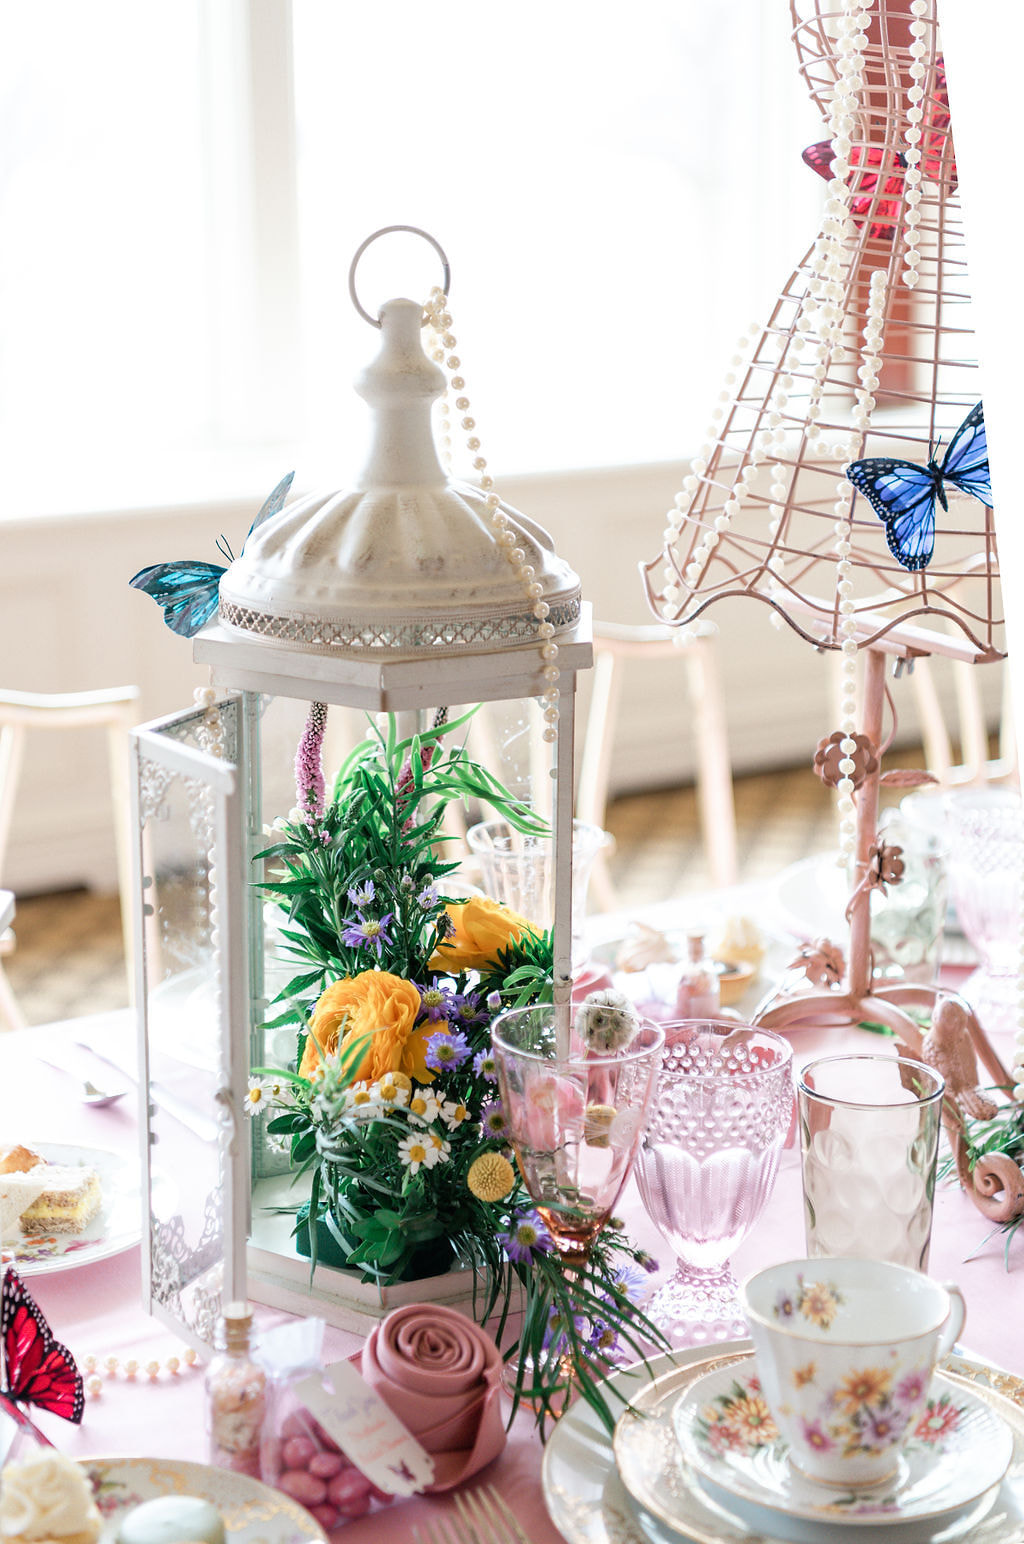 teacups and saucer  with pink goblets and decorated lantern